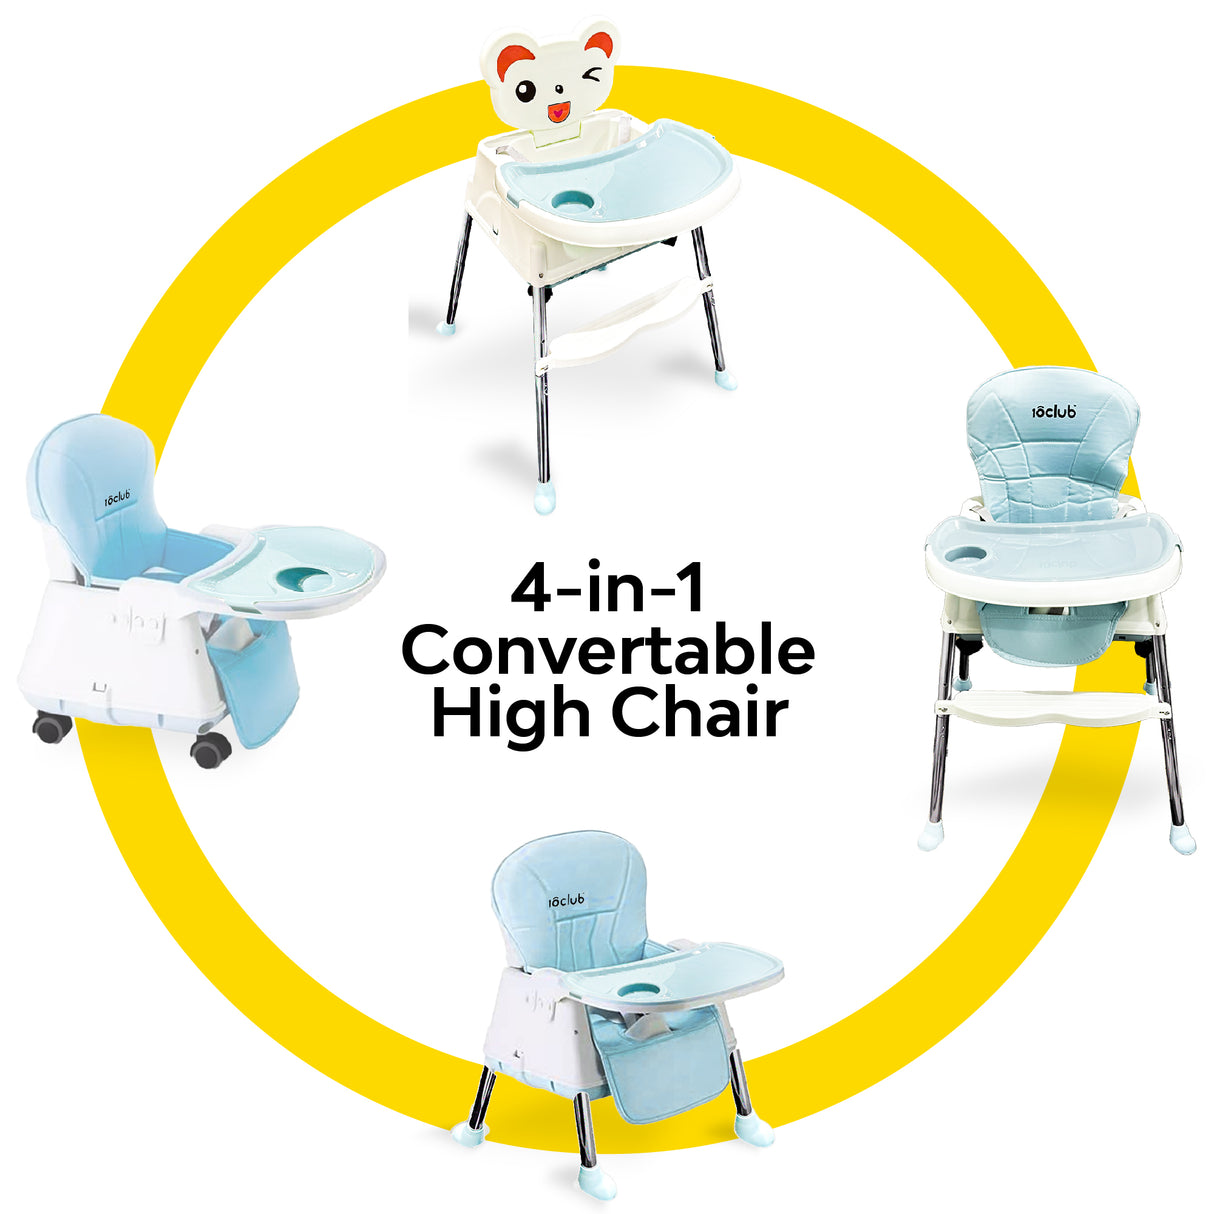 4 1n 1 Convertable High Chair with rubber grip 